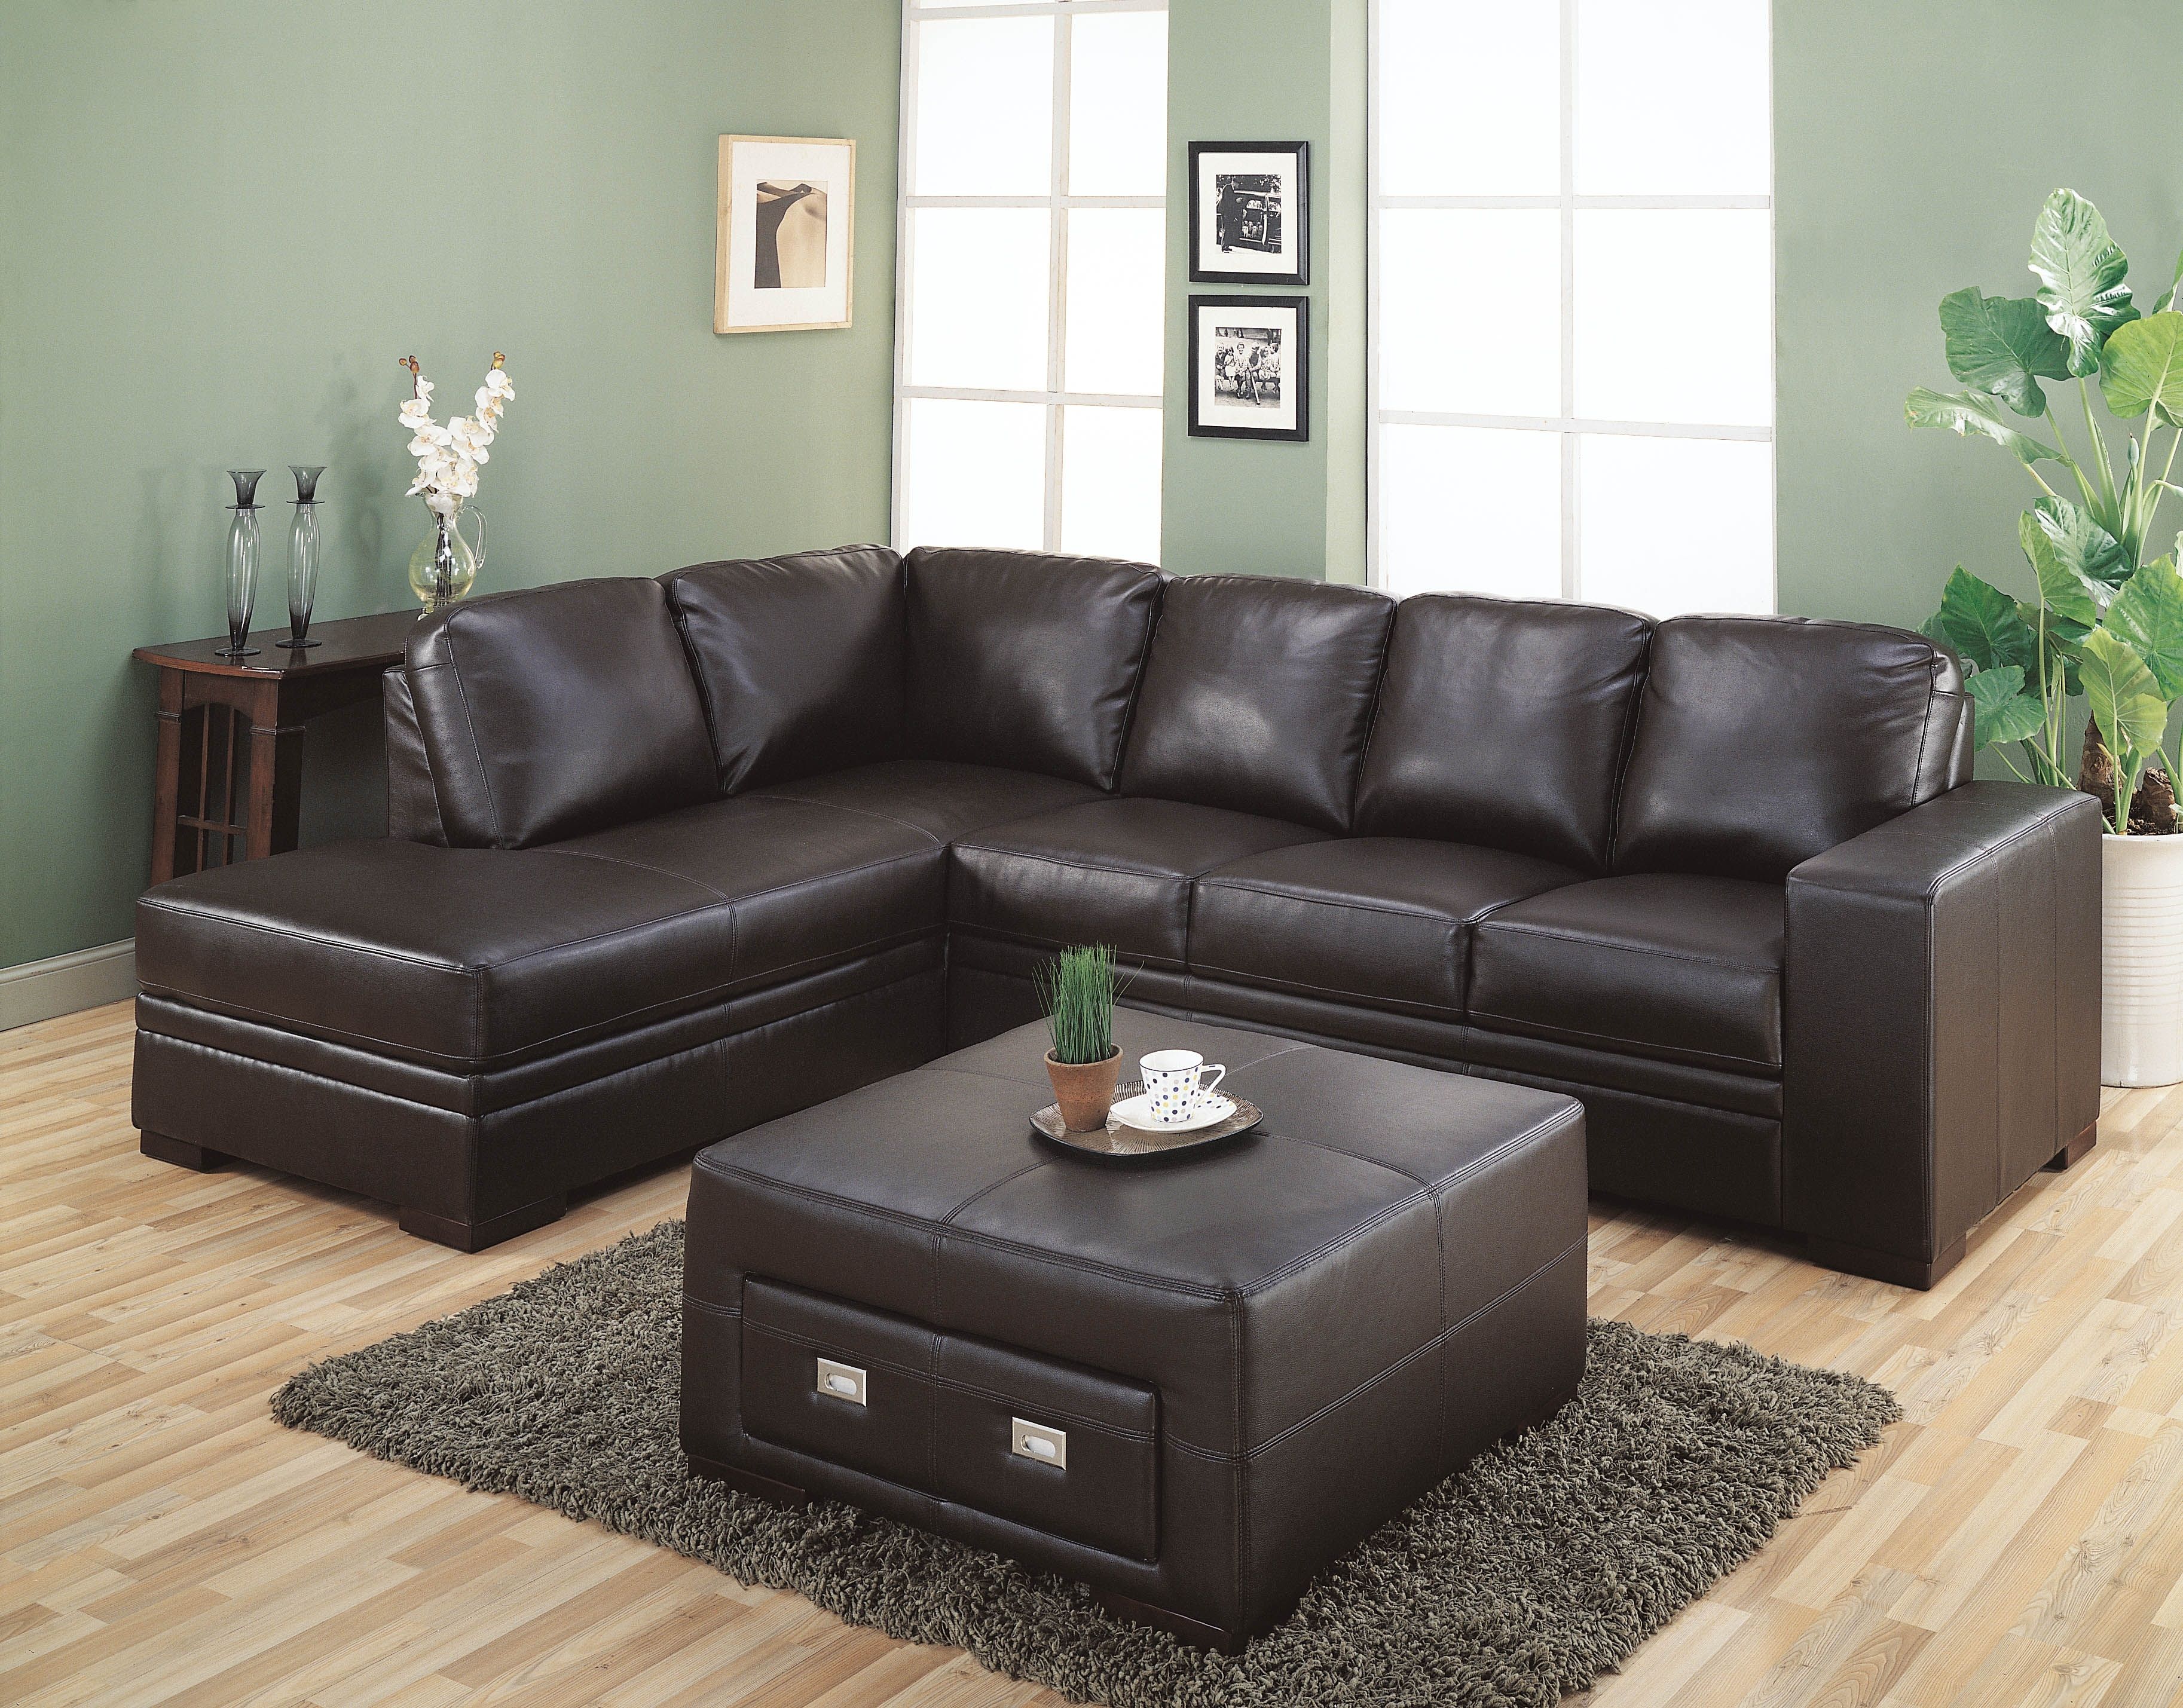 Modern Concept Chocolate Brown Sectional Sofa With Monarch Chocolate Intended For Chocolate Brown Sectional Sofas (View 10 of 10)